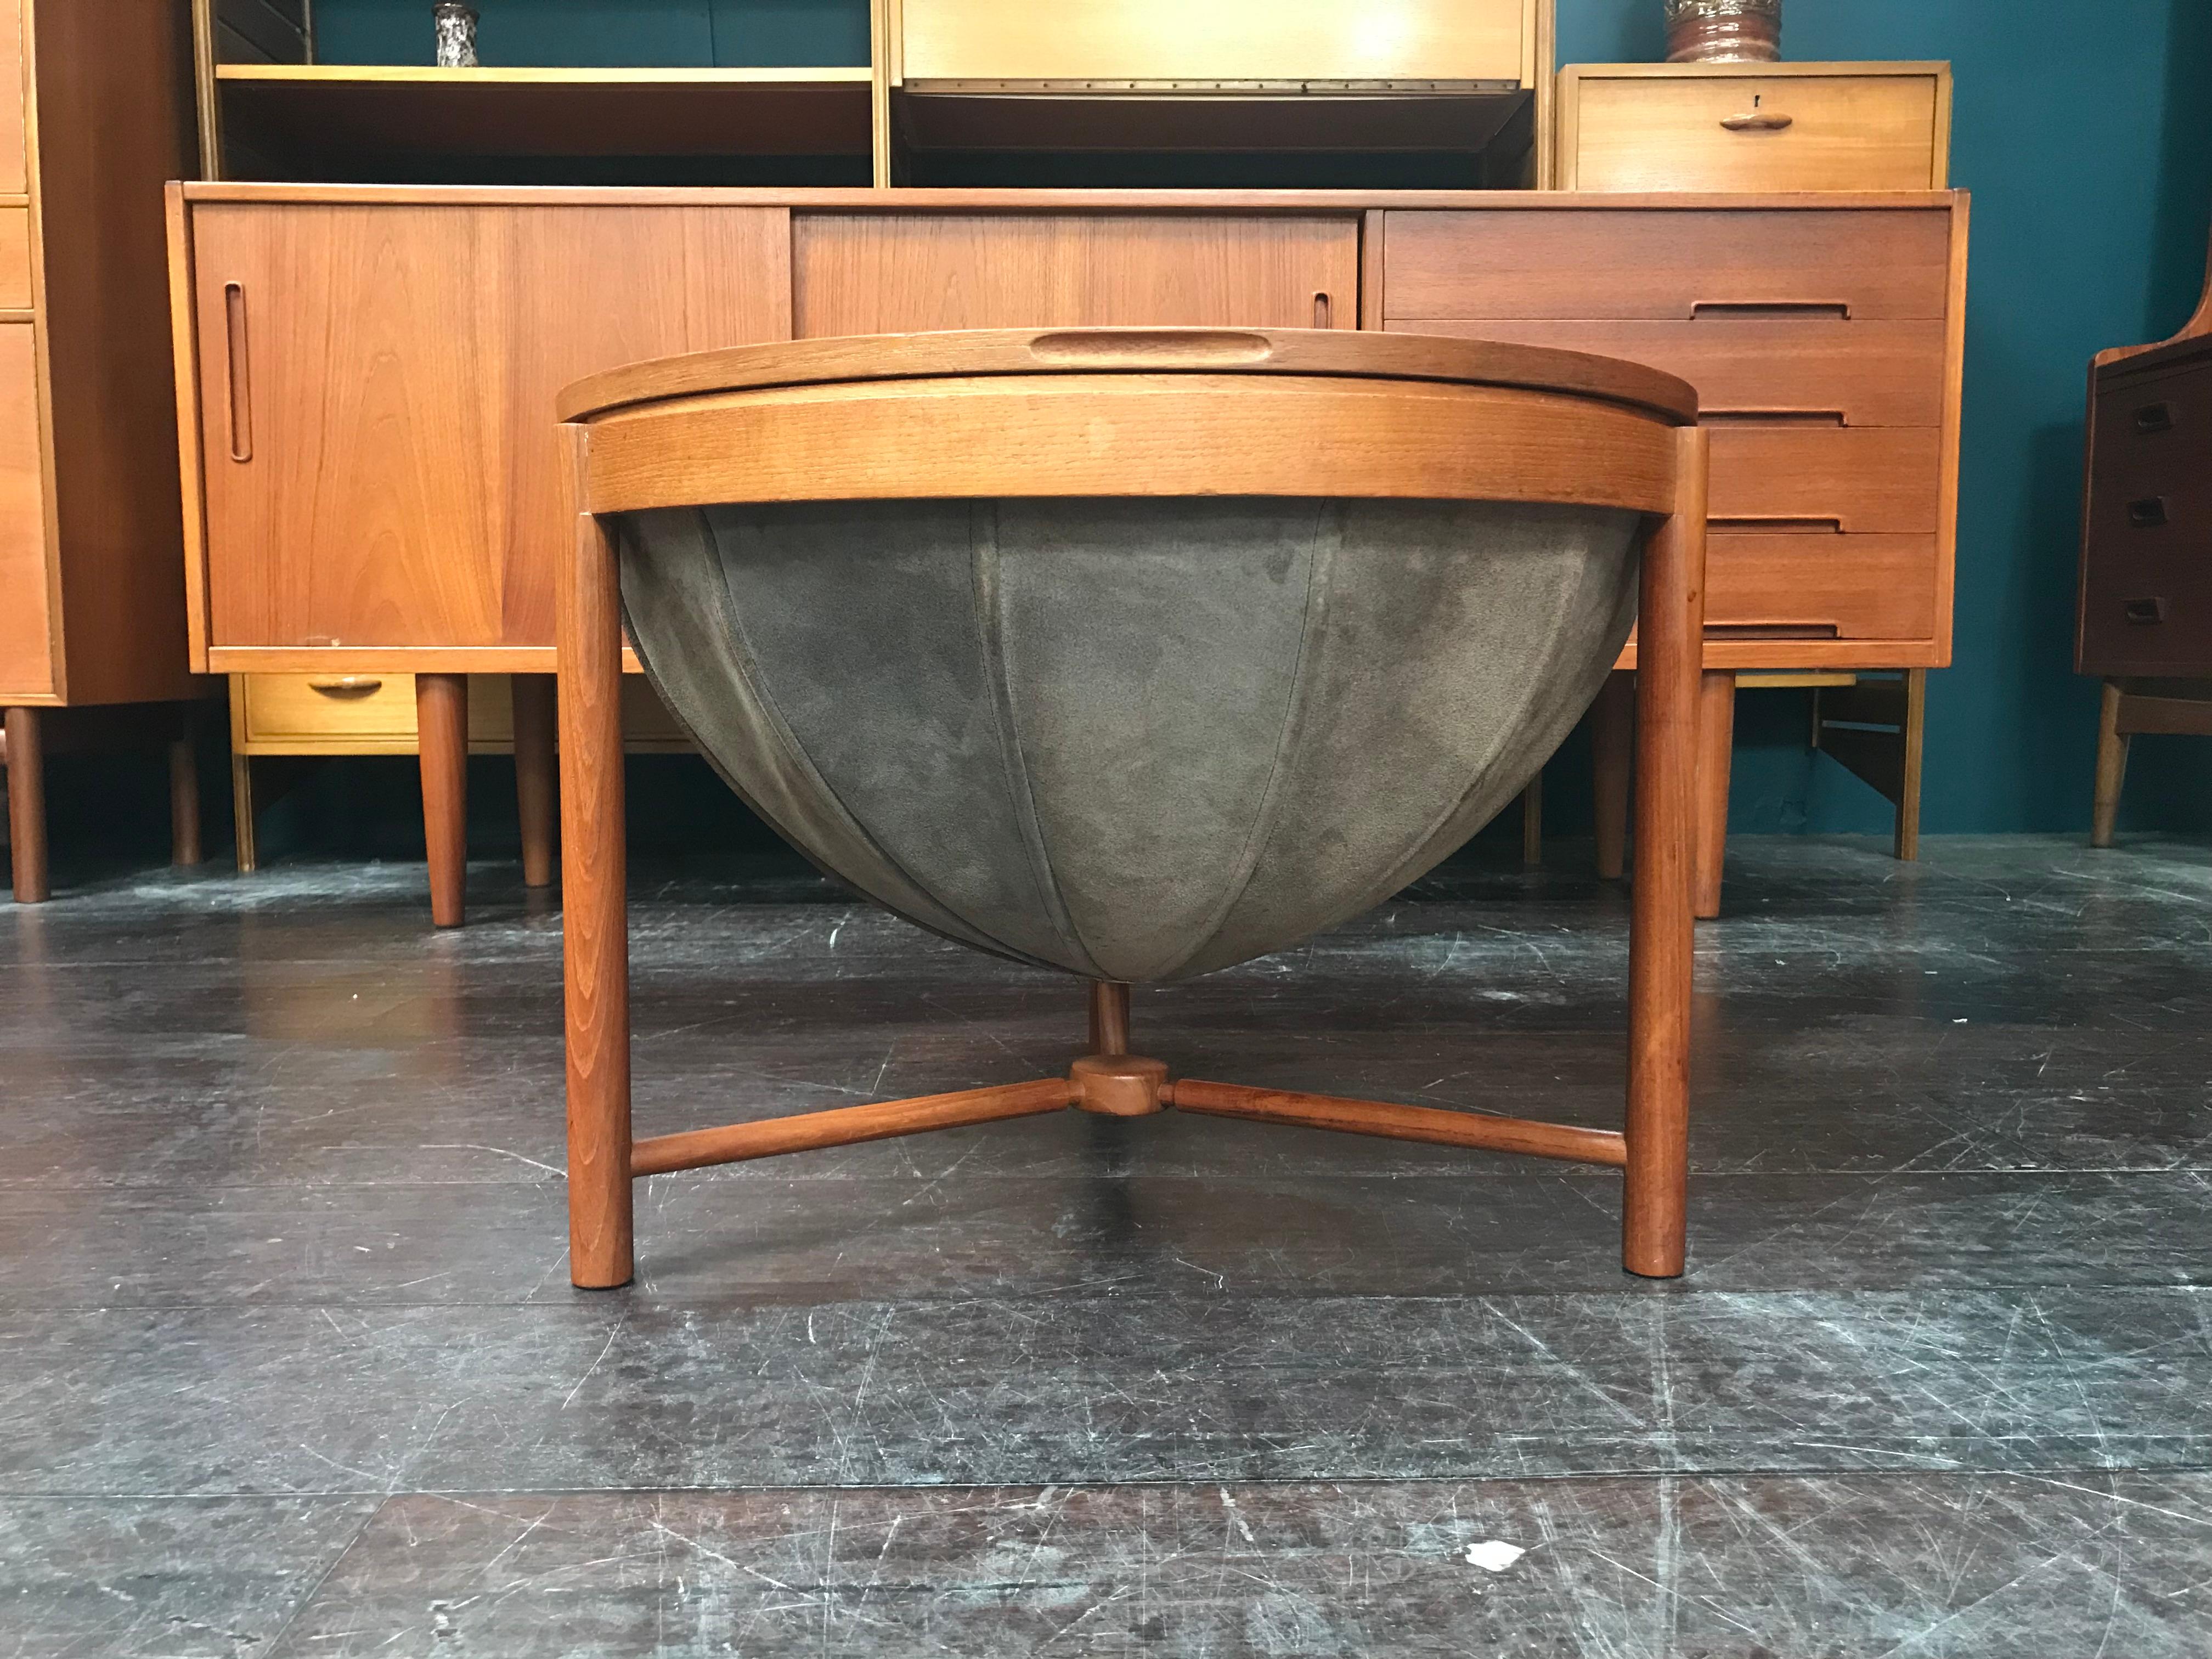 This is a vintage Norwegian design round sewing table in teak with storage basket that offers a rare chance to own a highly desirable piece of midcentury design. This little sewing table is beautifully made and can be used for a variety of purposes.